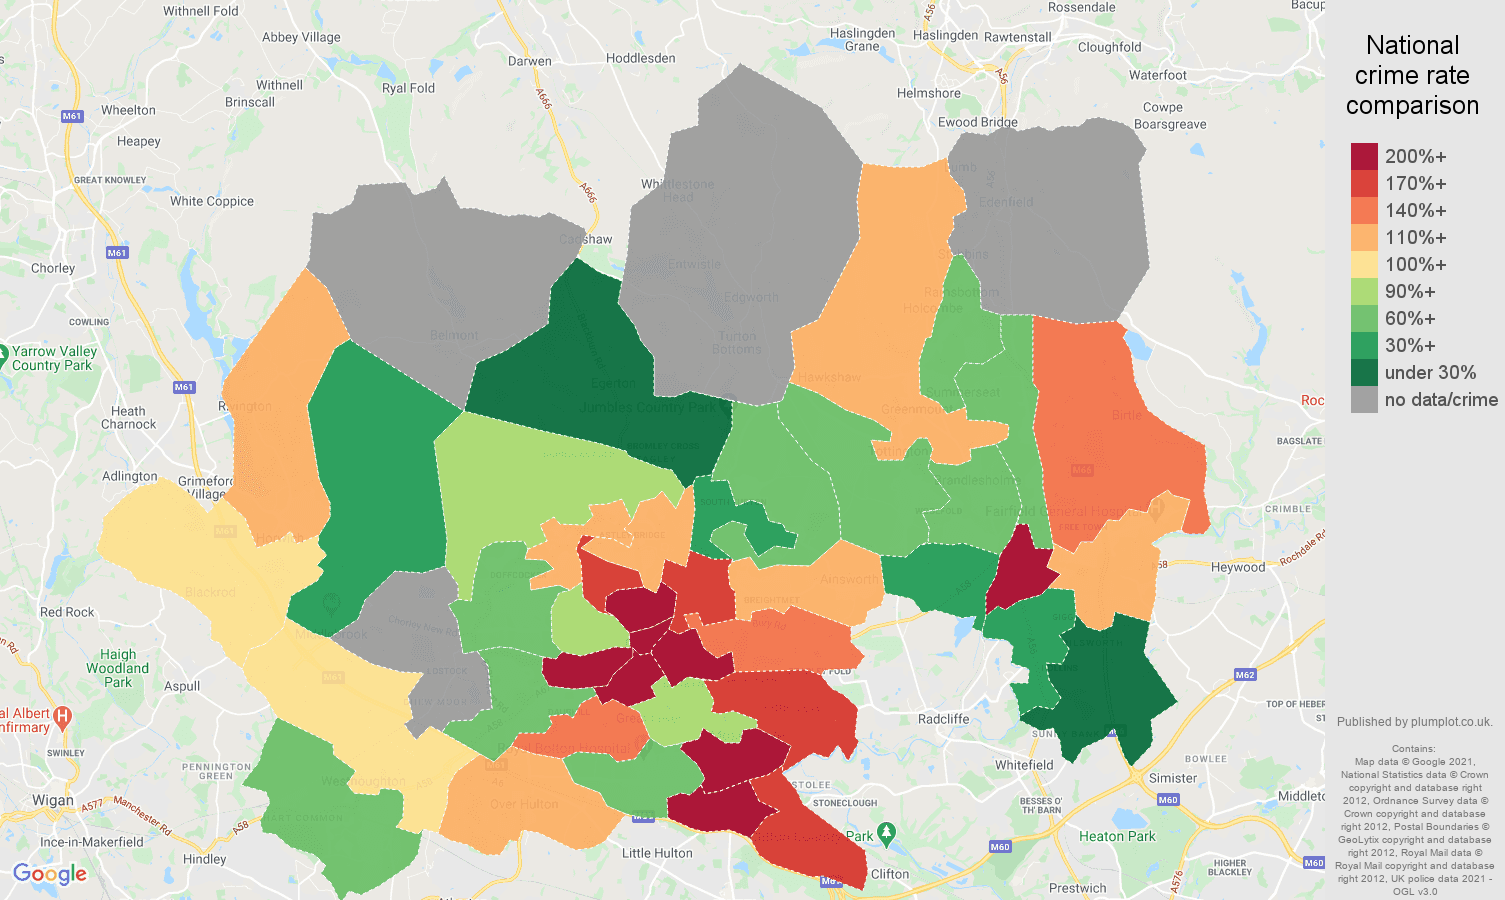 Bolton possession of weapons crime rate comparison map